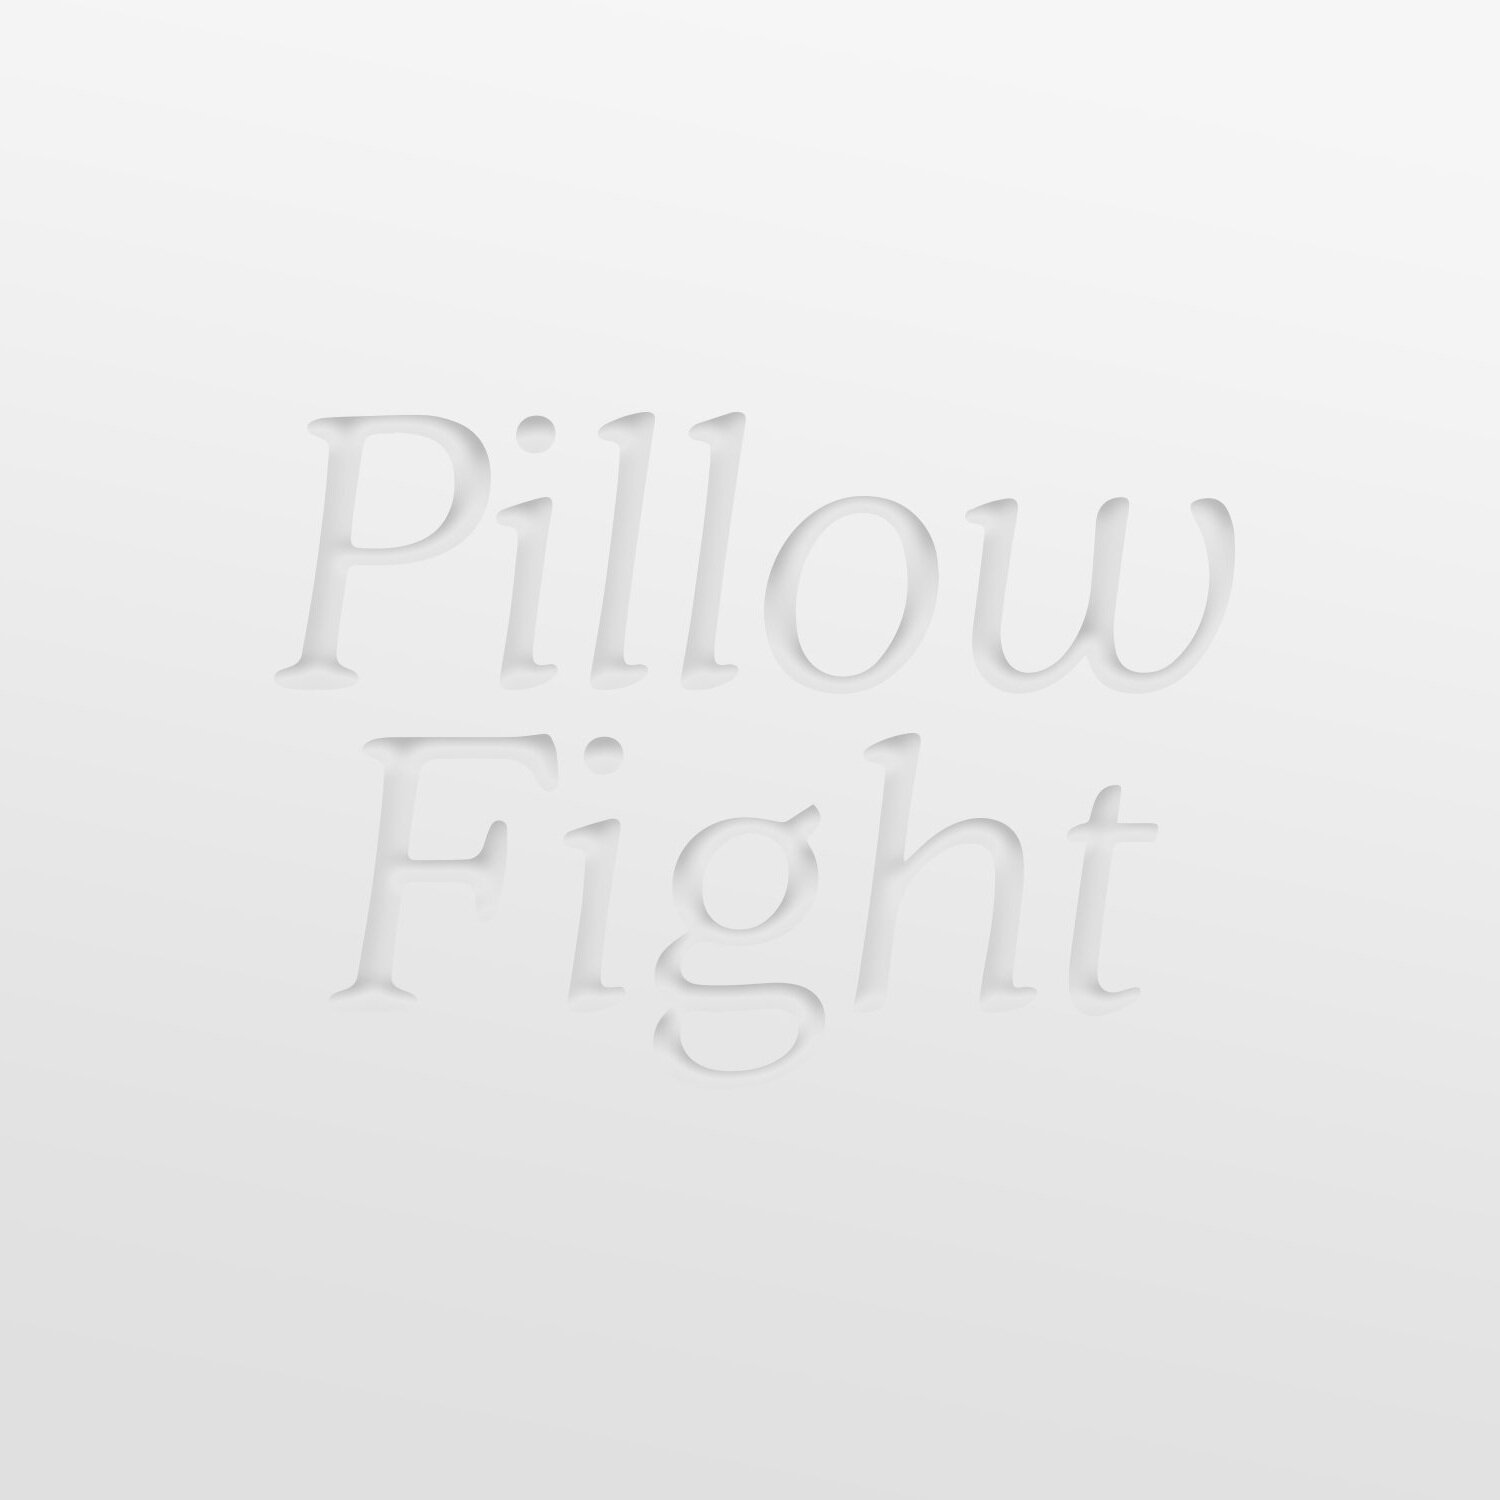 Pillow Fight EP